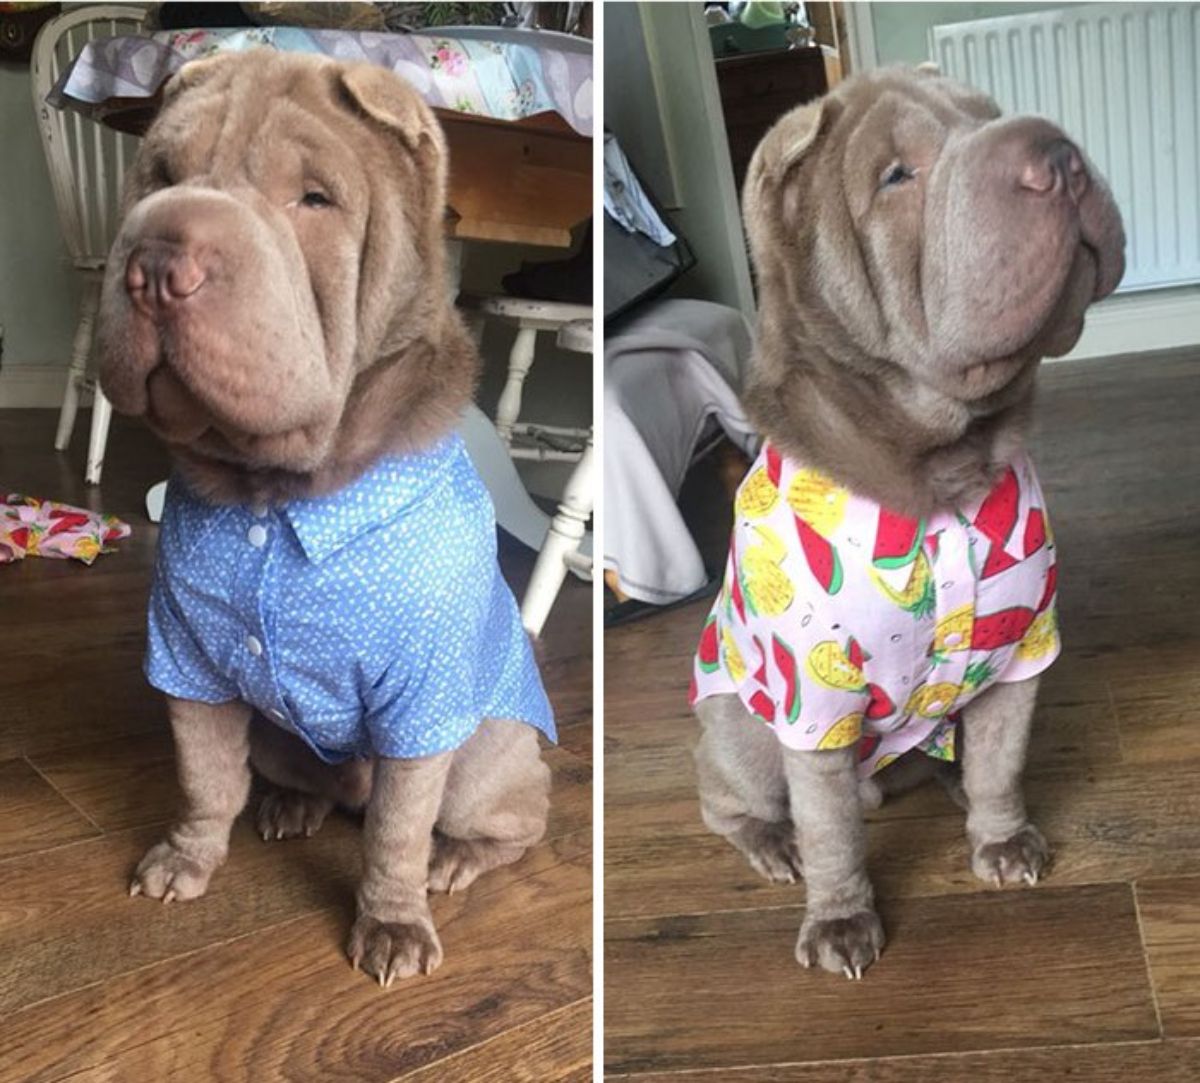 2 photos of a brown shar pei wearing a blue and white polka dotted shirt and a pink shirt with red and green watermelons and yellow pineapples